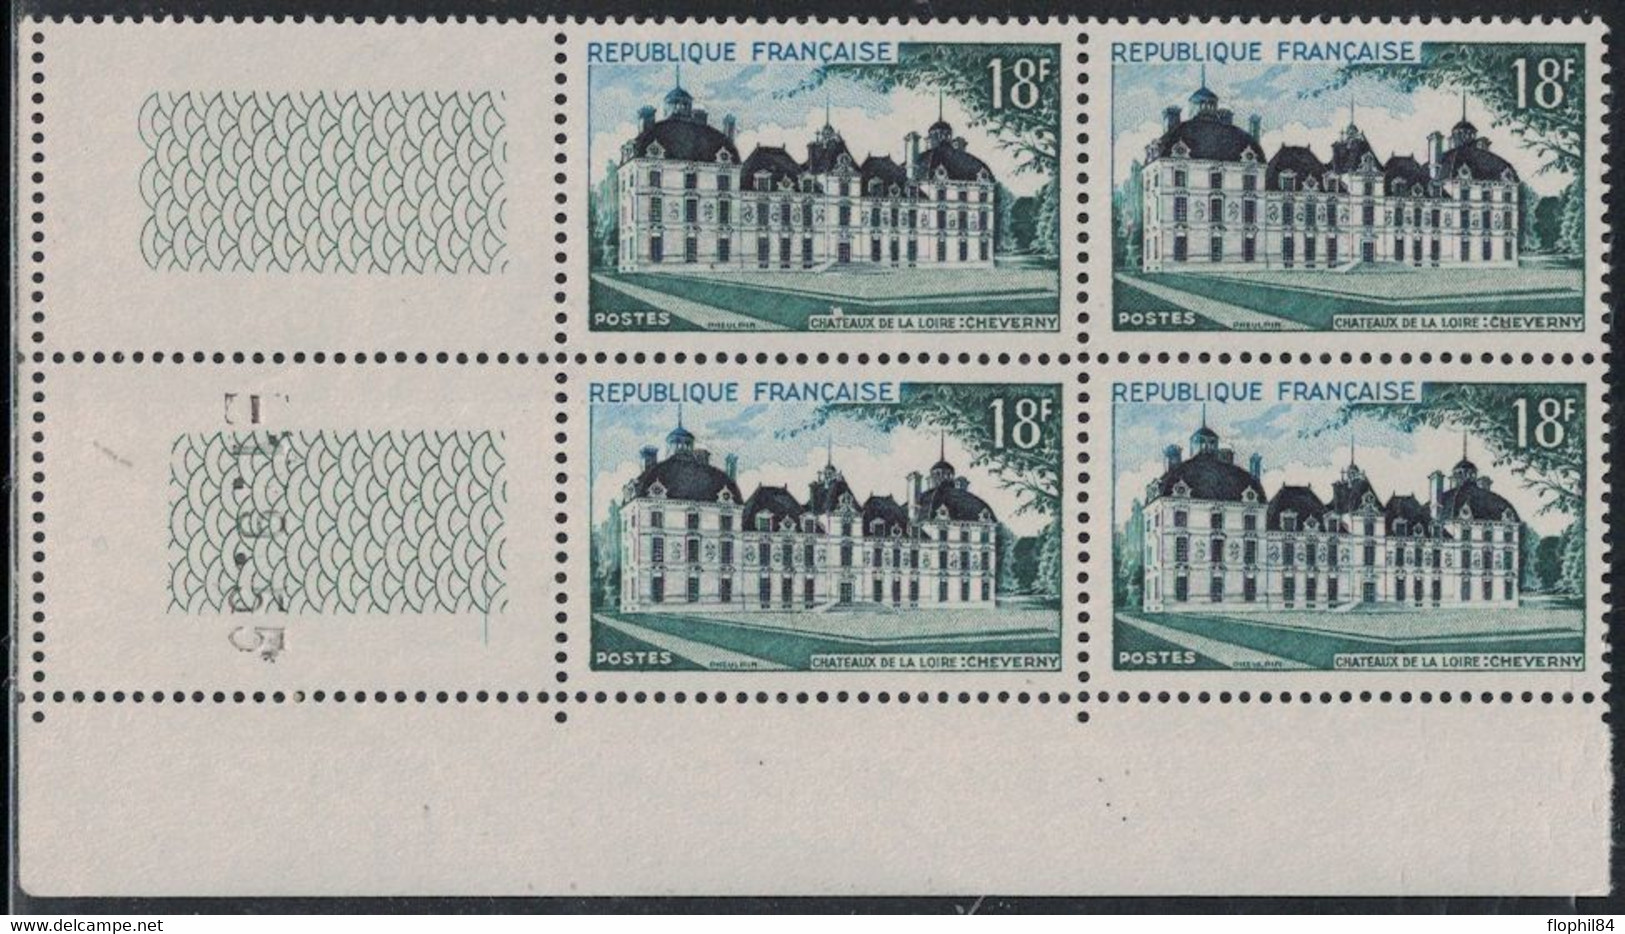 N°980 - CHEVERNY - COIN DATE - LE 1-9-1955 - . COTE 18€. - 1950-1959